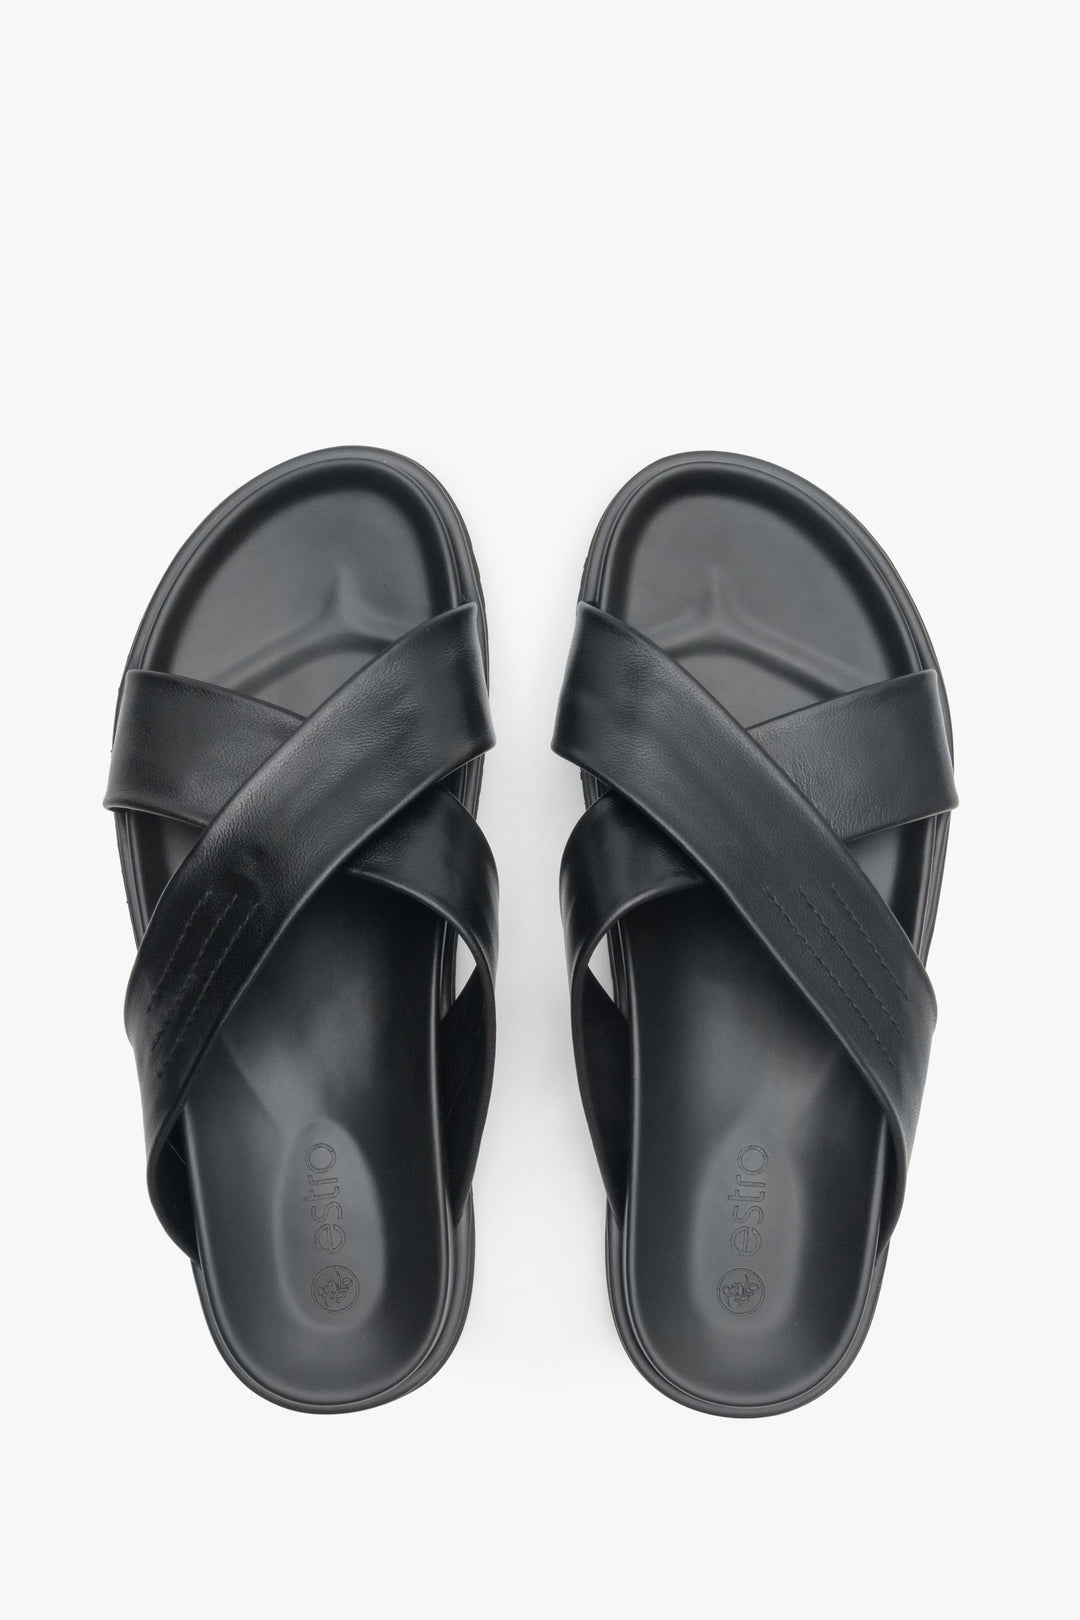 Men's black leather sandals by Estro with thick cross straps - top view model presentation.